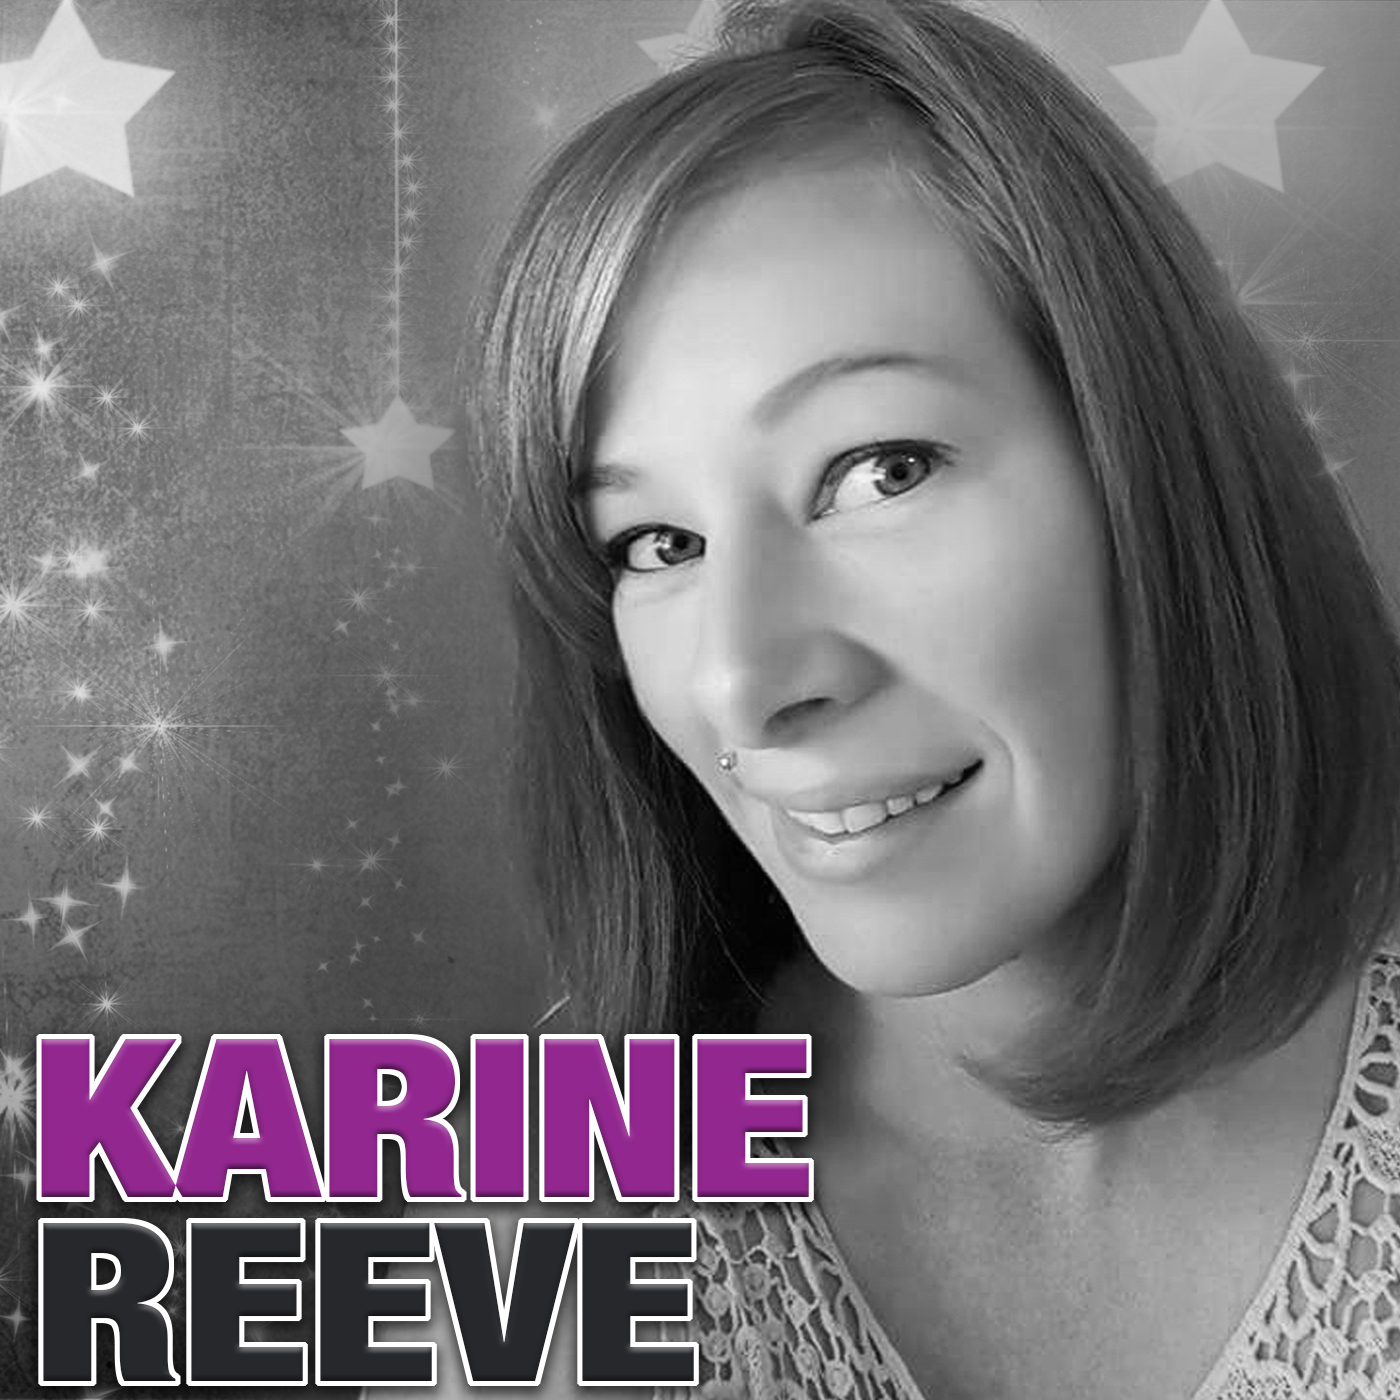 LIP 072: Styling Beauty on the Inside with Karine Reeve